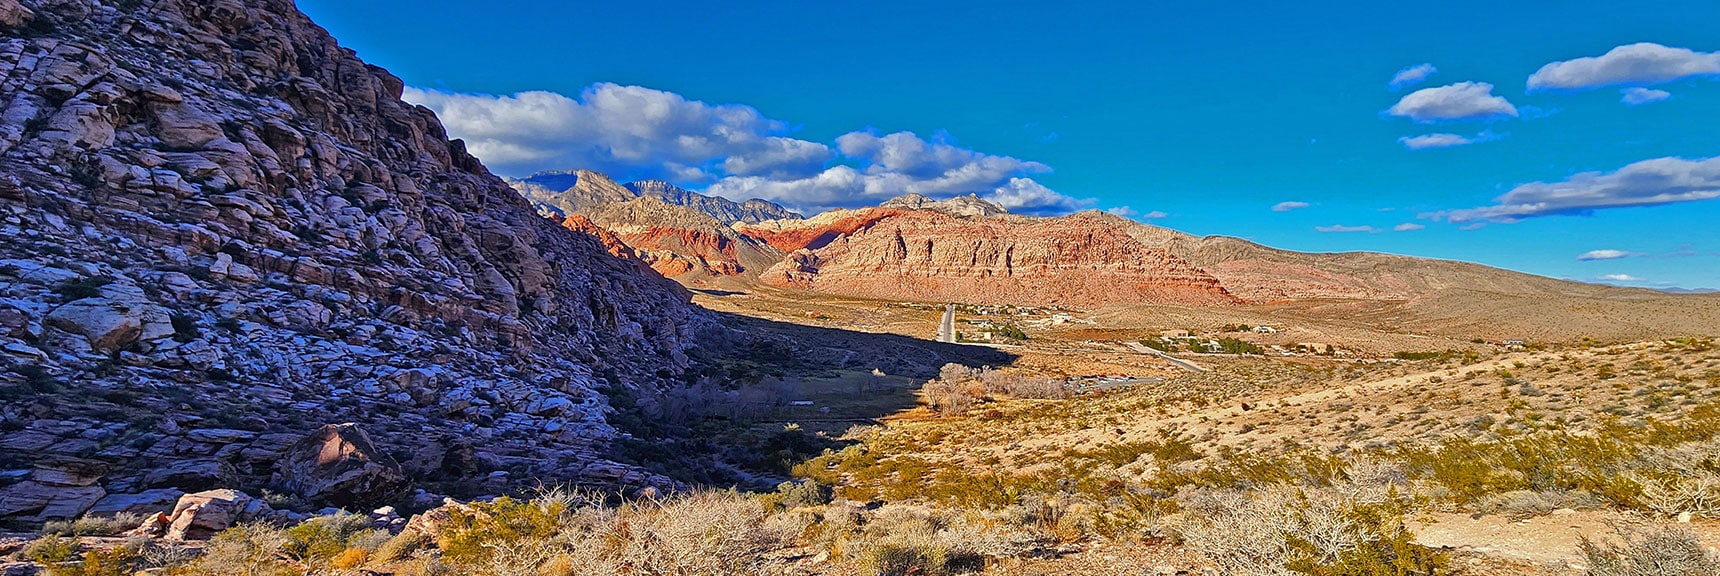 Red Springs Ridge Trail Brings You Back Full Circle to Your Starting Point | Lower Calico Hills Loop | Calico Basin & Red Rock Canyon, Nevada